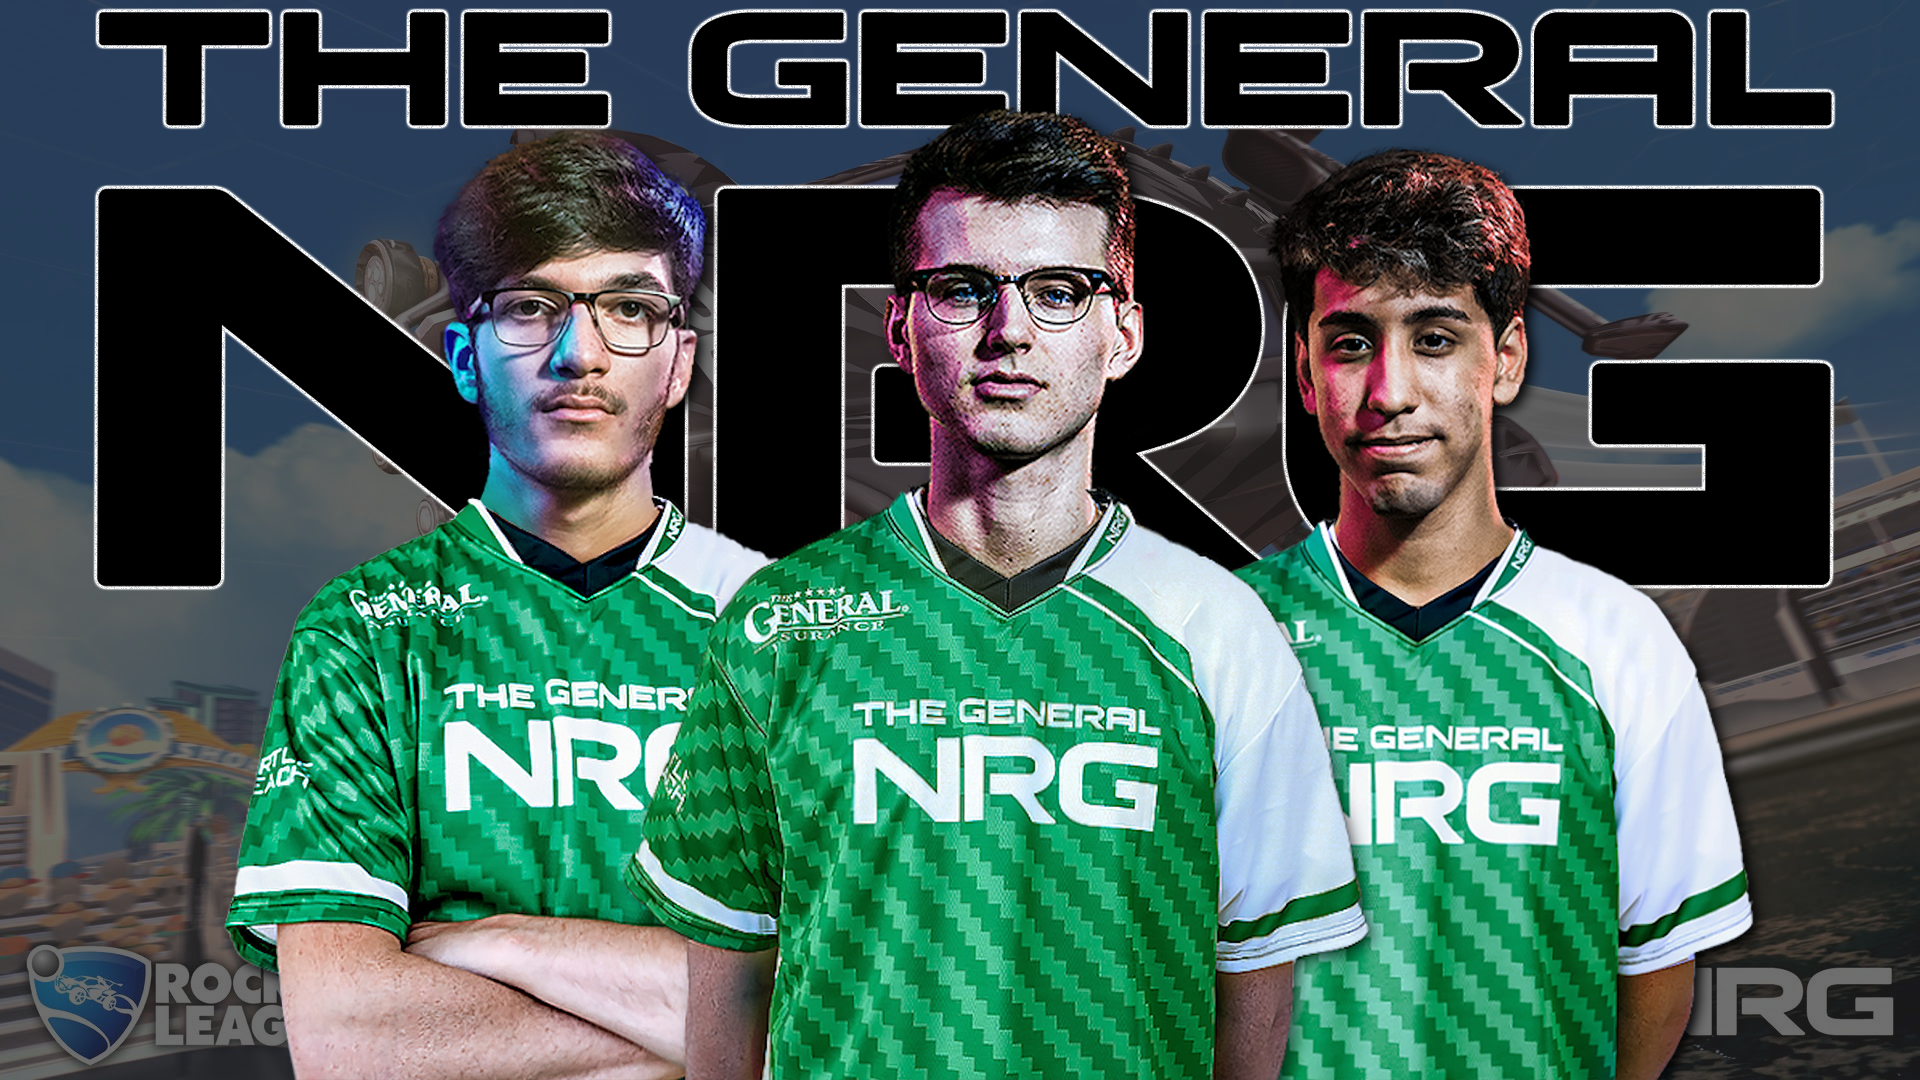 Nrg Rocket League Team Rename To The General Nrg Ggrecon